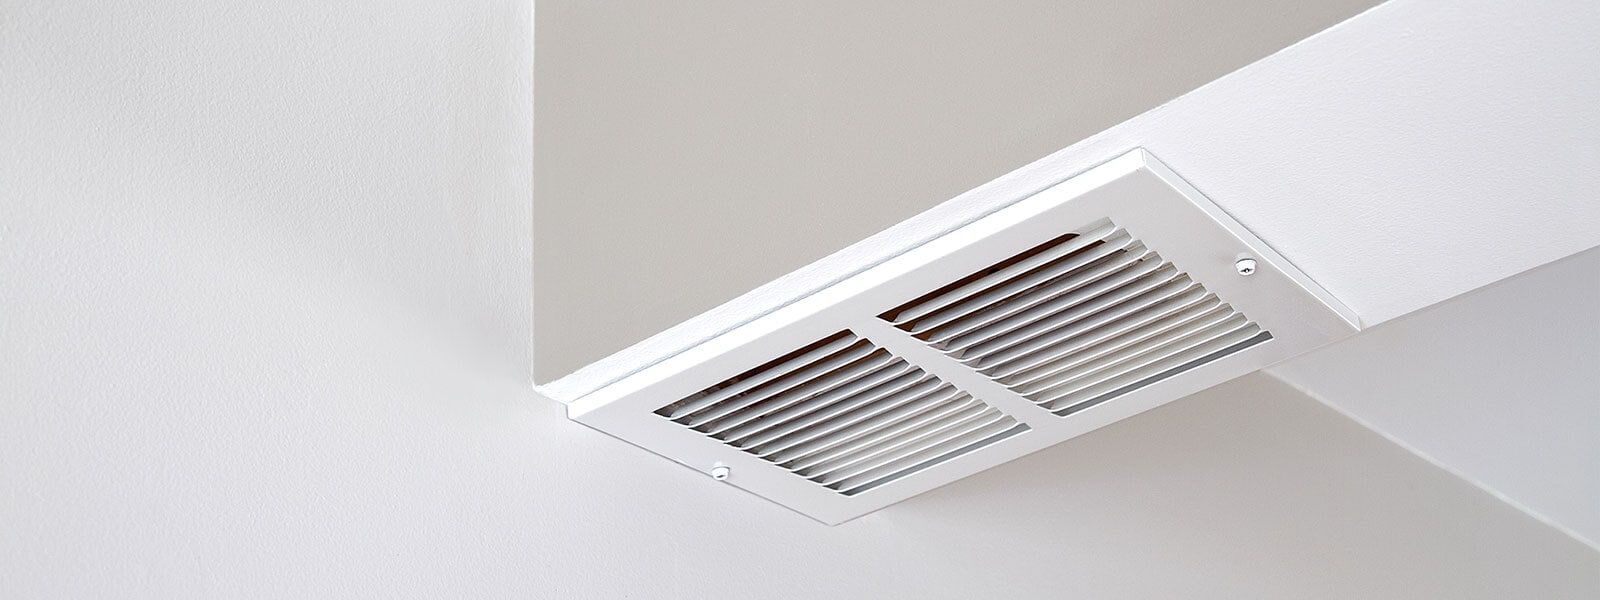 No Air Duct Cleaning Professional? Why You Should Reconsider